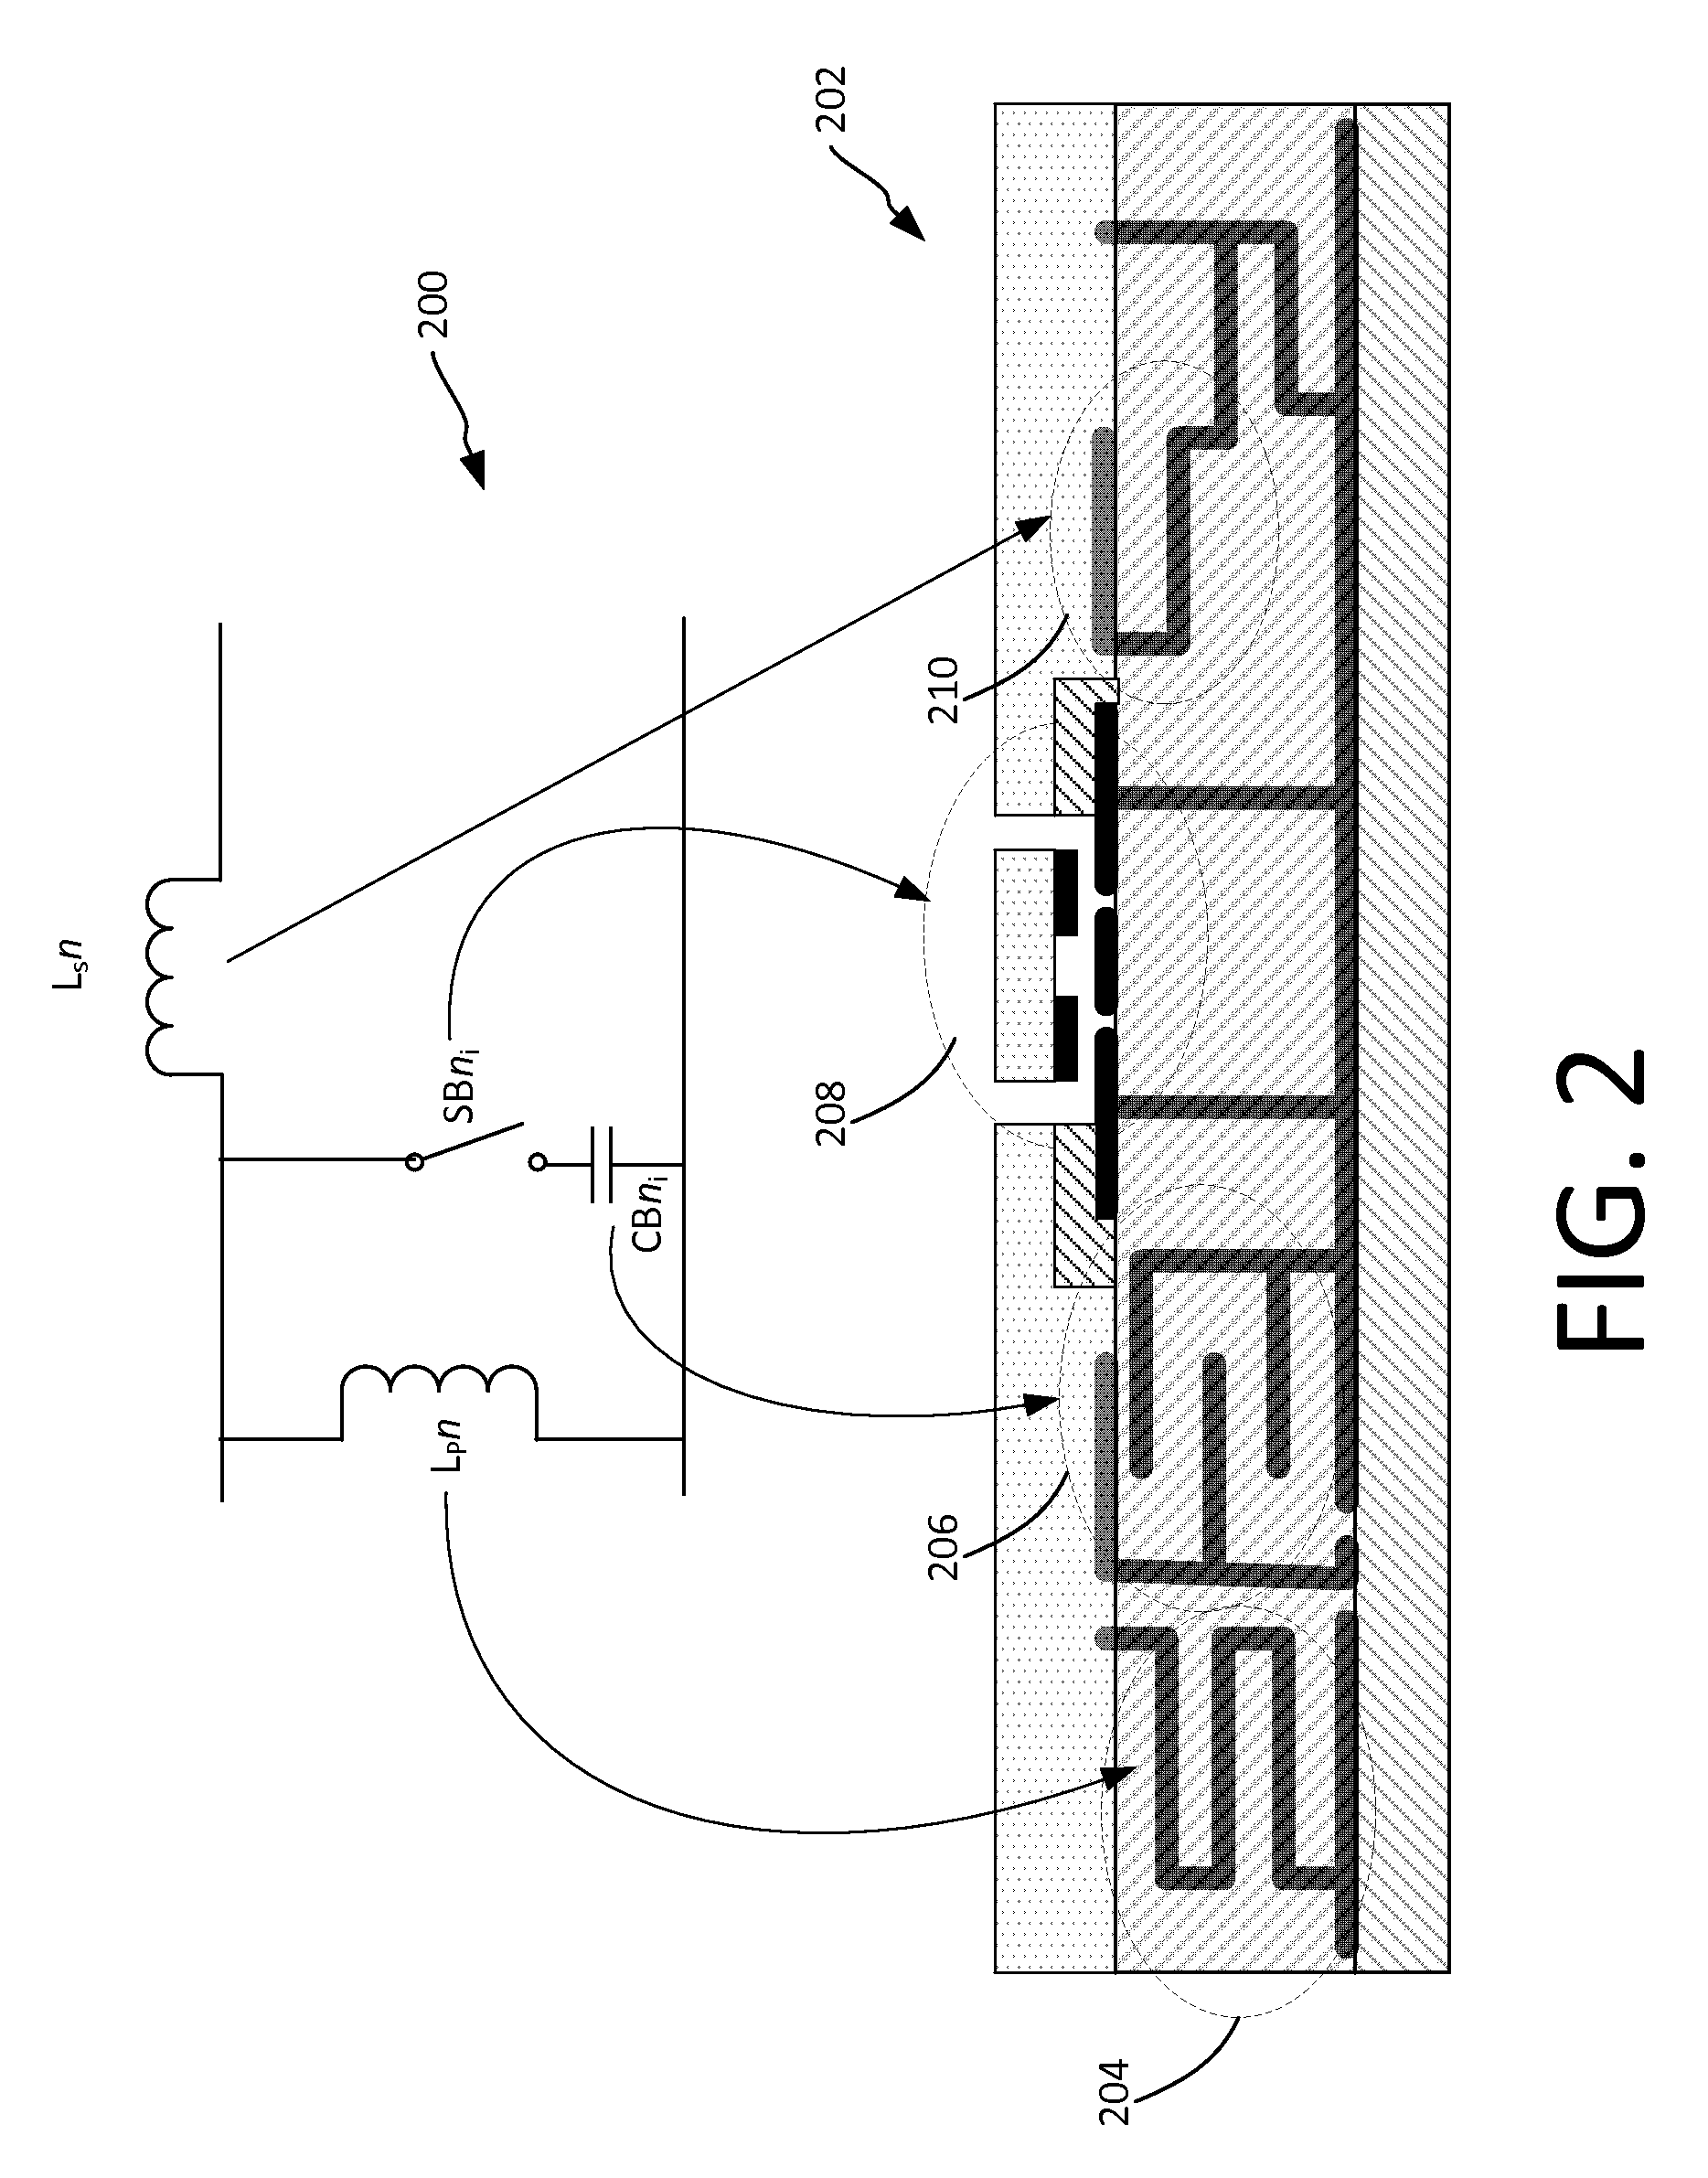 Method of manufacturing a switch system